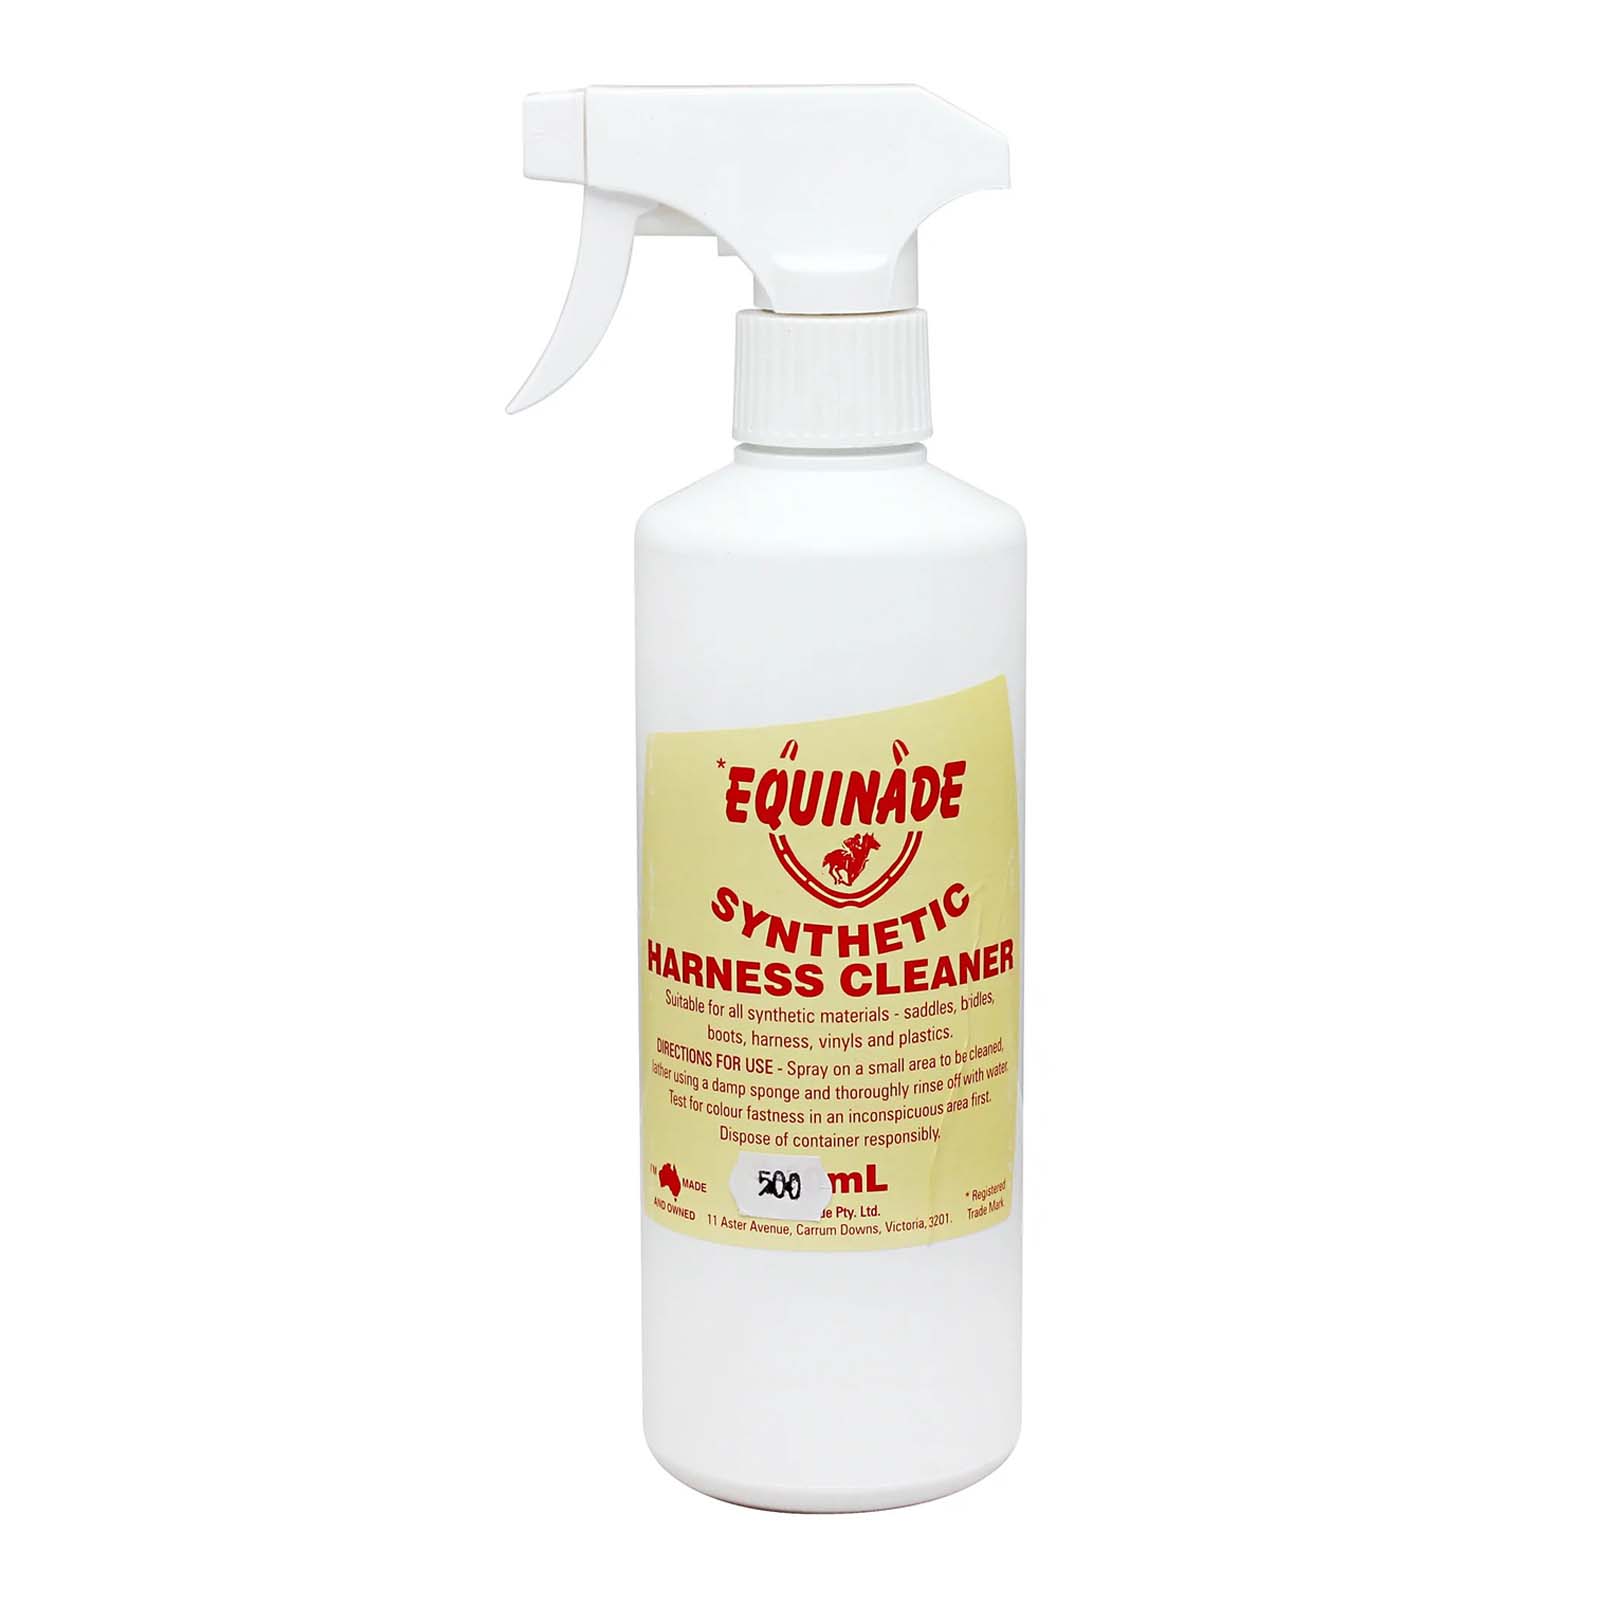 Equinade Synthetic Harness Cleaner for Horse